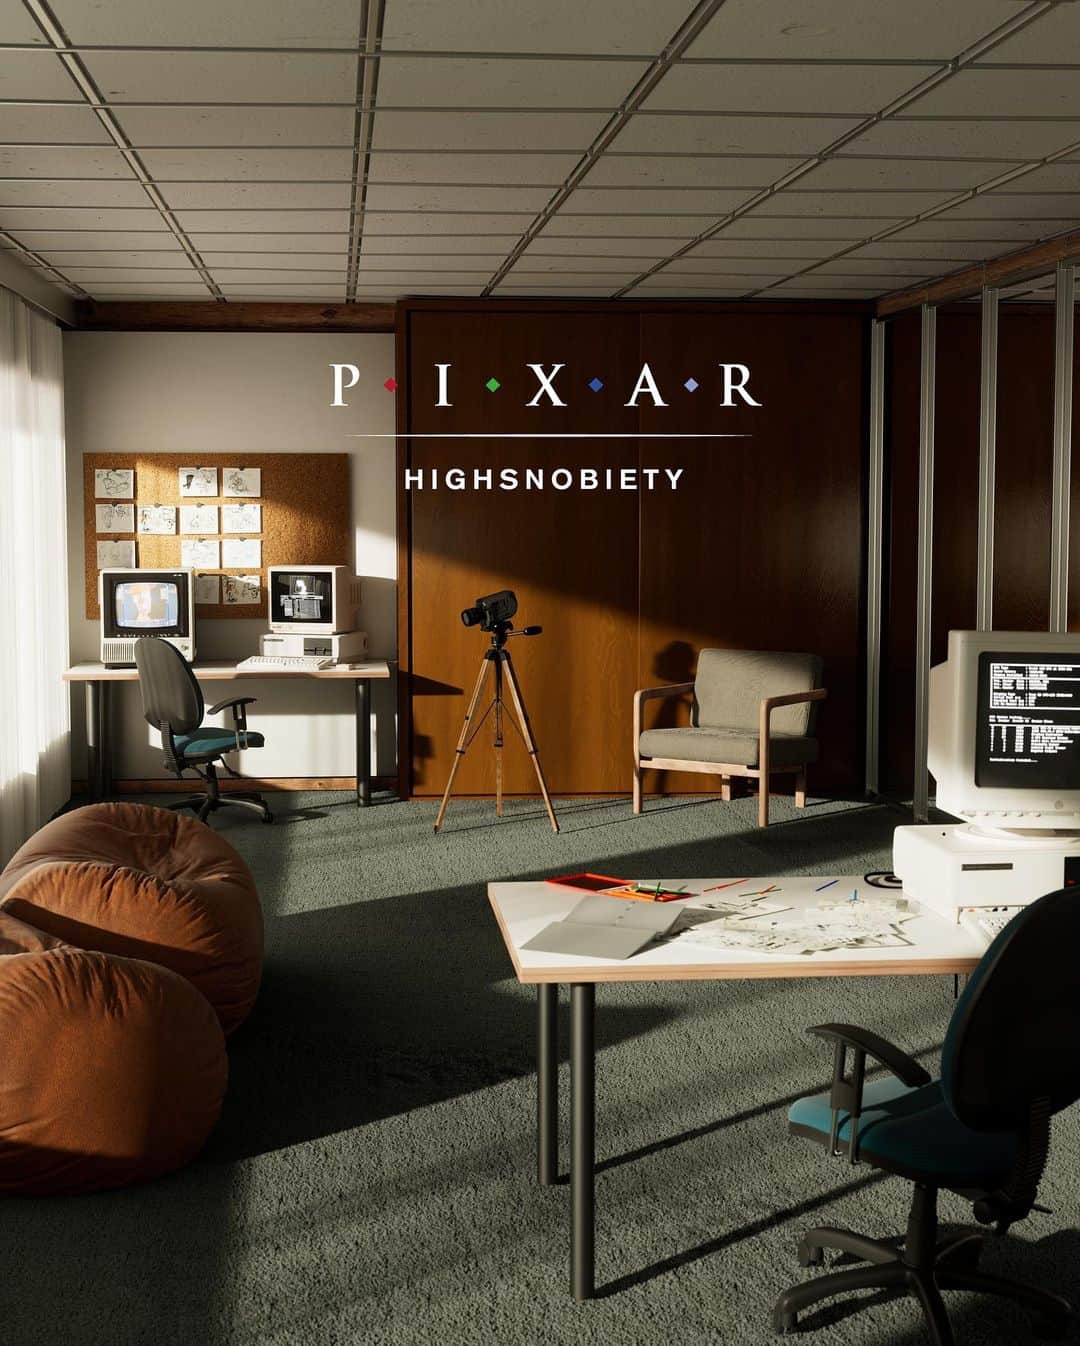 Disney Pixarのインスタグラム：「Pixar x Highsnobiety honor the early days of CGI before Toy Story was released. We have a lesser-known history involving Star Wars creator George Lucas, Steve Jobs, and a wildly expensive computer. Our collaboration with Highsnobiety honors our beginnings and celebrates our legacy as a pioneer of CGI and animation. This 9-piece capsule collection looks at some of our instantly recognizable iconography along with exclusive imagery of our first-ever product: the Pixar Image Computer.   This Pixar x Highsnobiety capsule is releasing 11.3 on the Highsnobiety iOS App and the @highsnobietyshop」